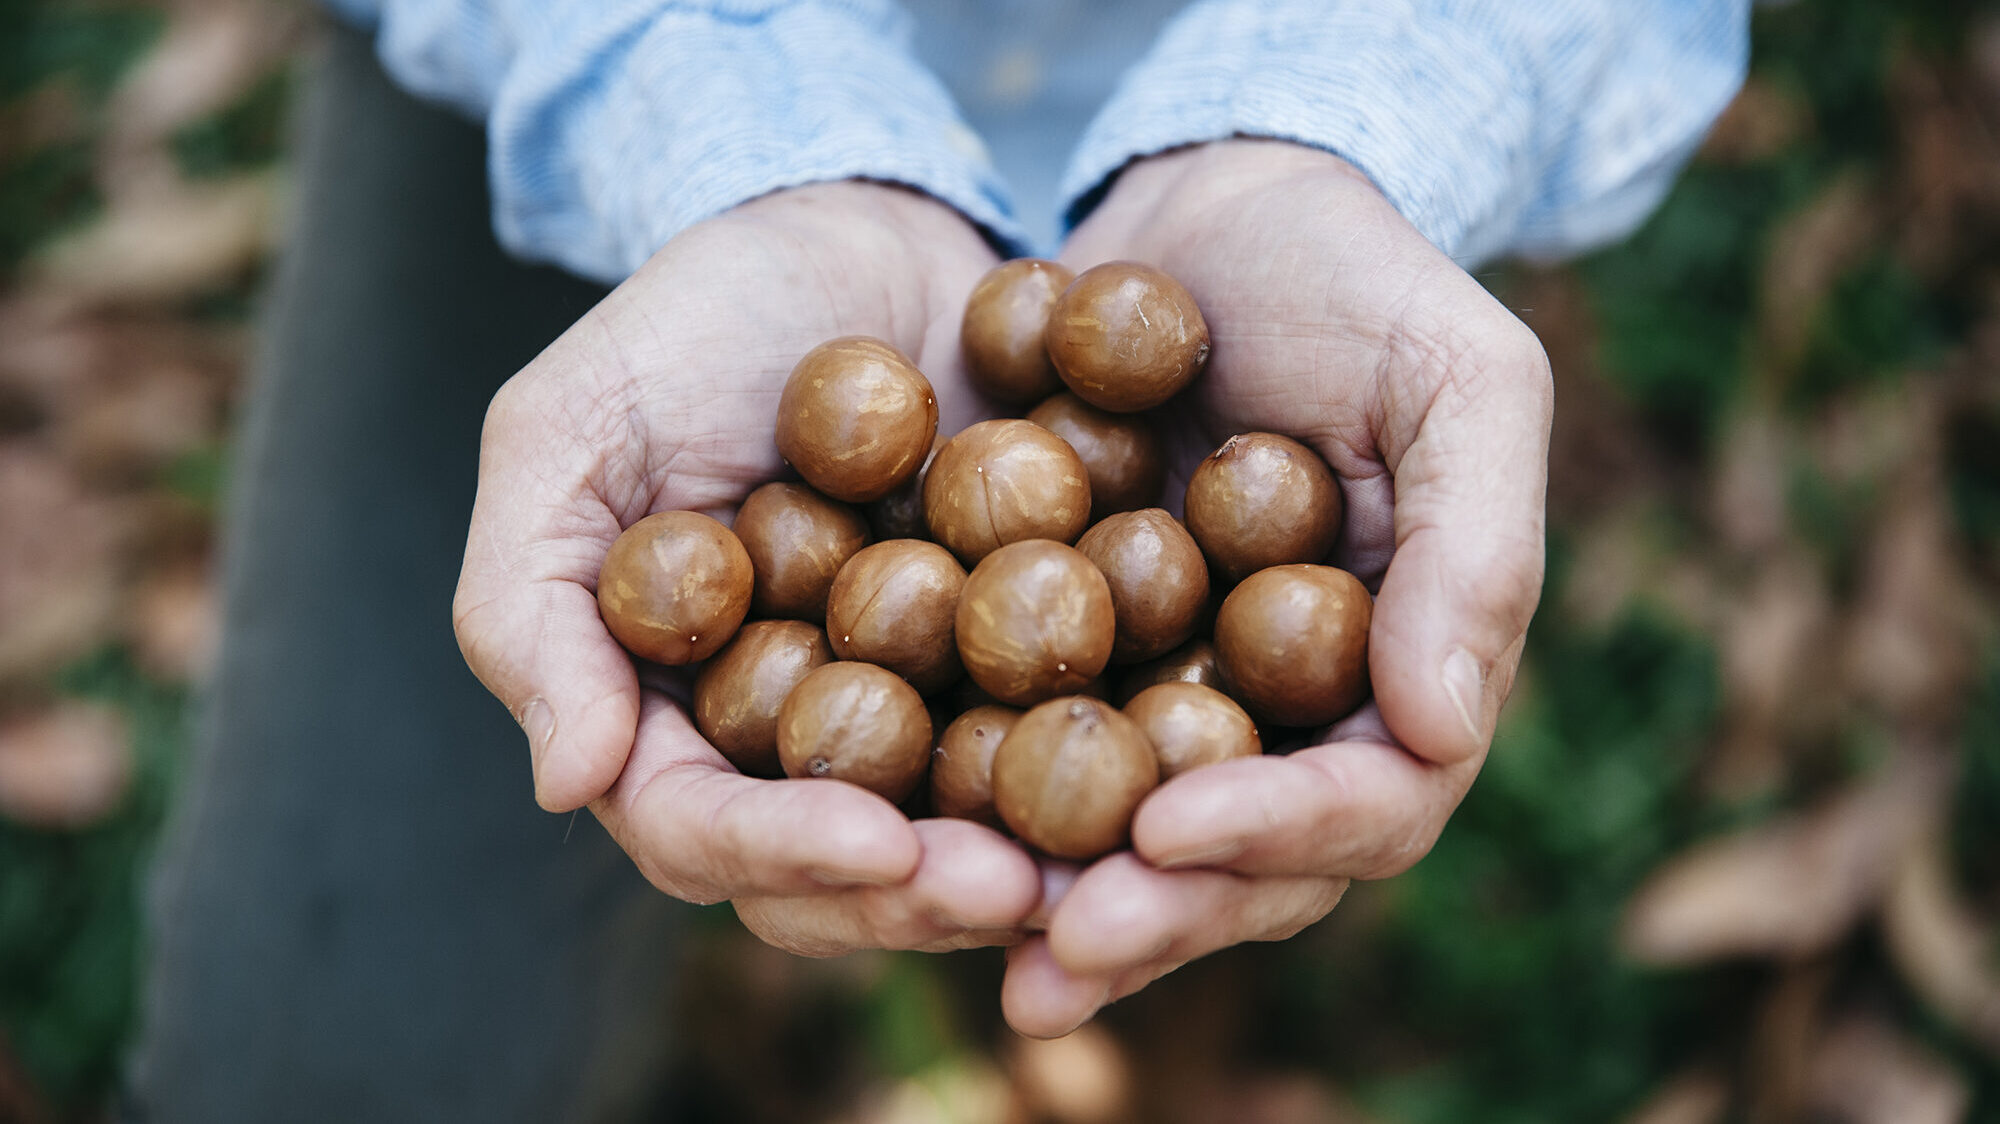 Macadamias are a convenient and healthy wholefood